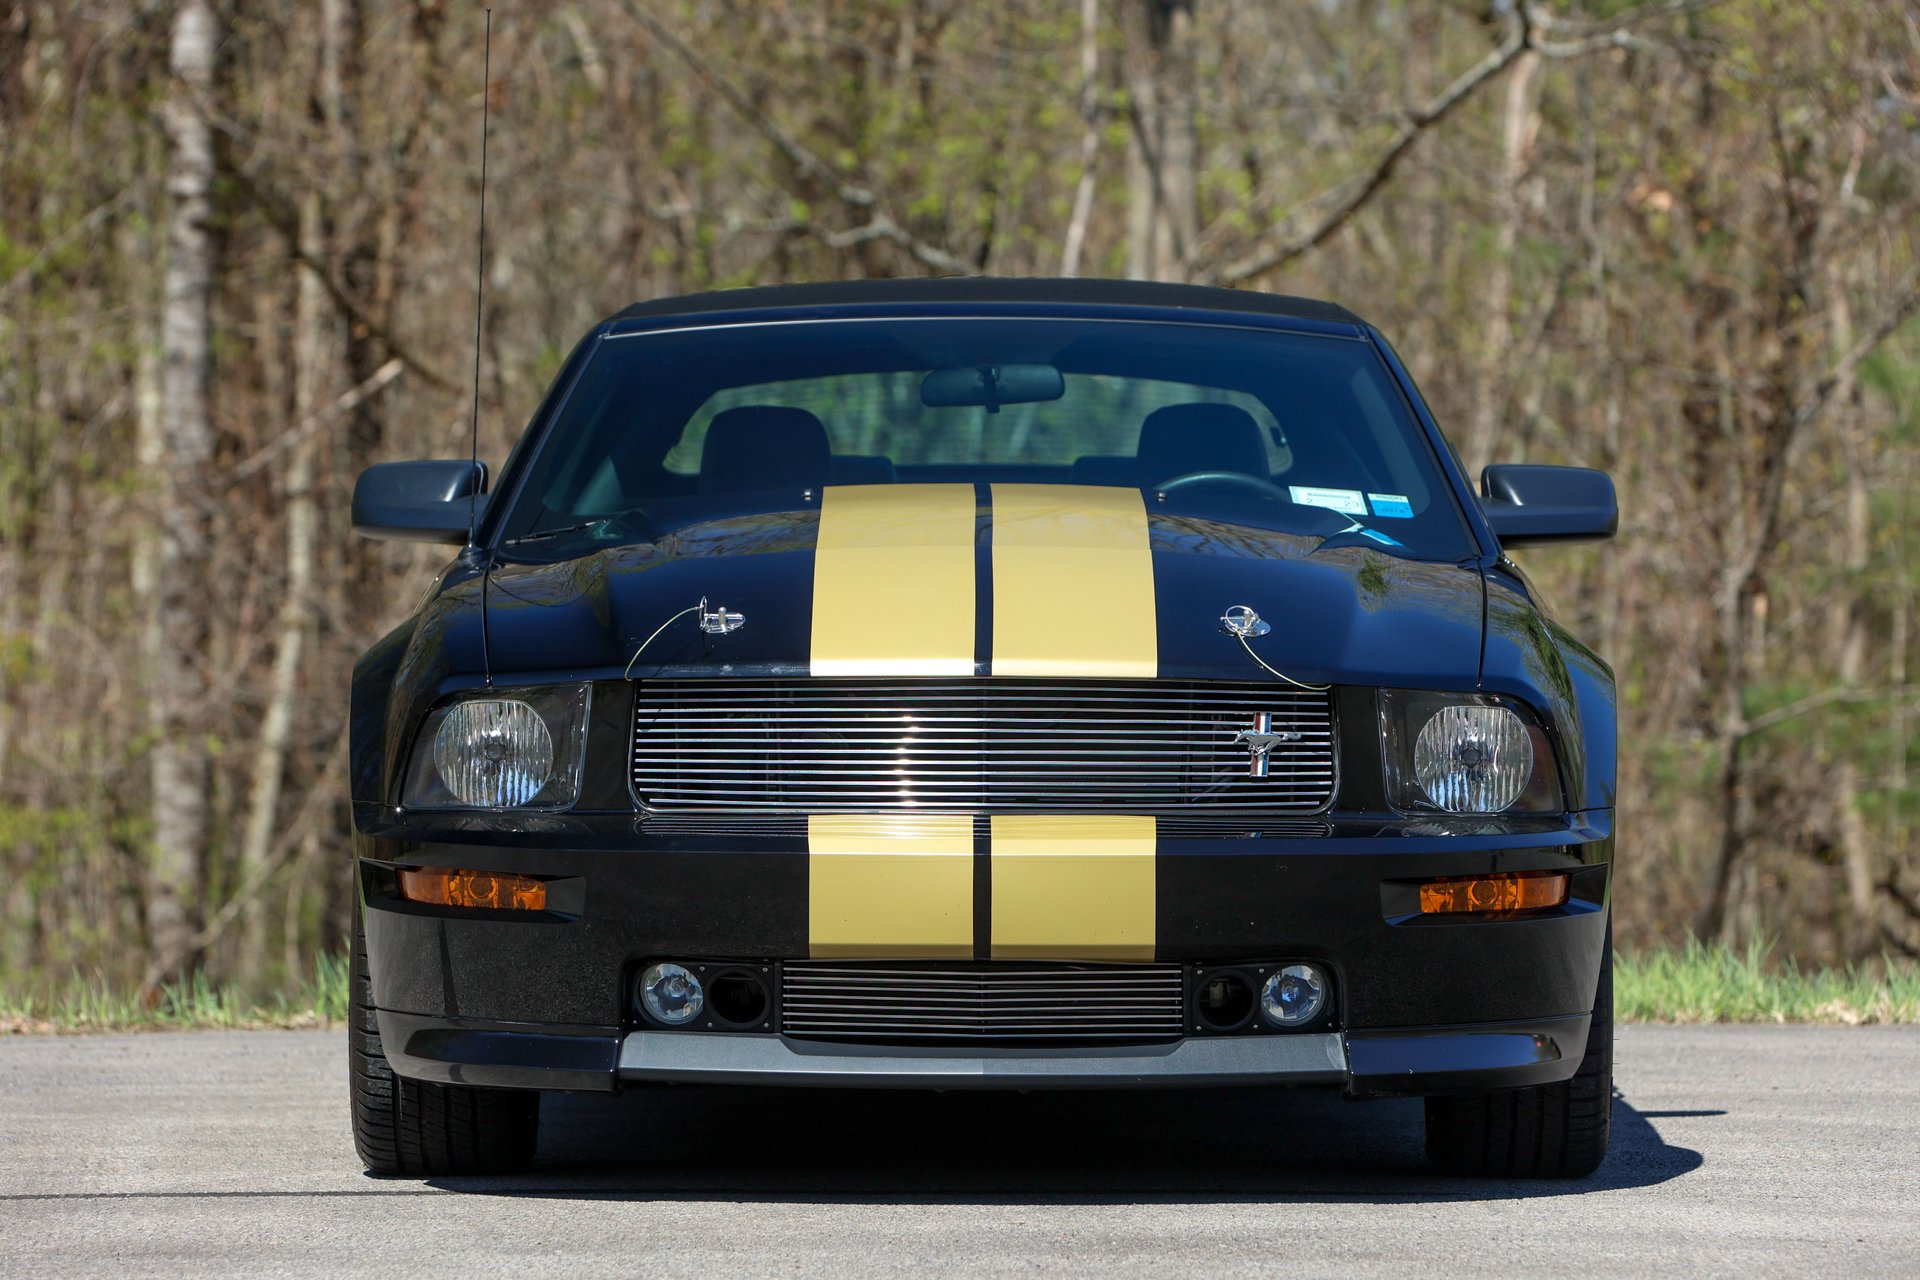 For Sale 2007 Ford Shelby Mustang GT-H Convertible 'Executive Car'